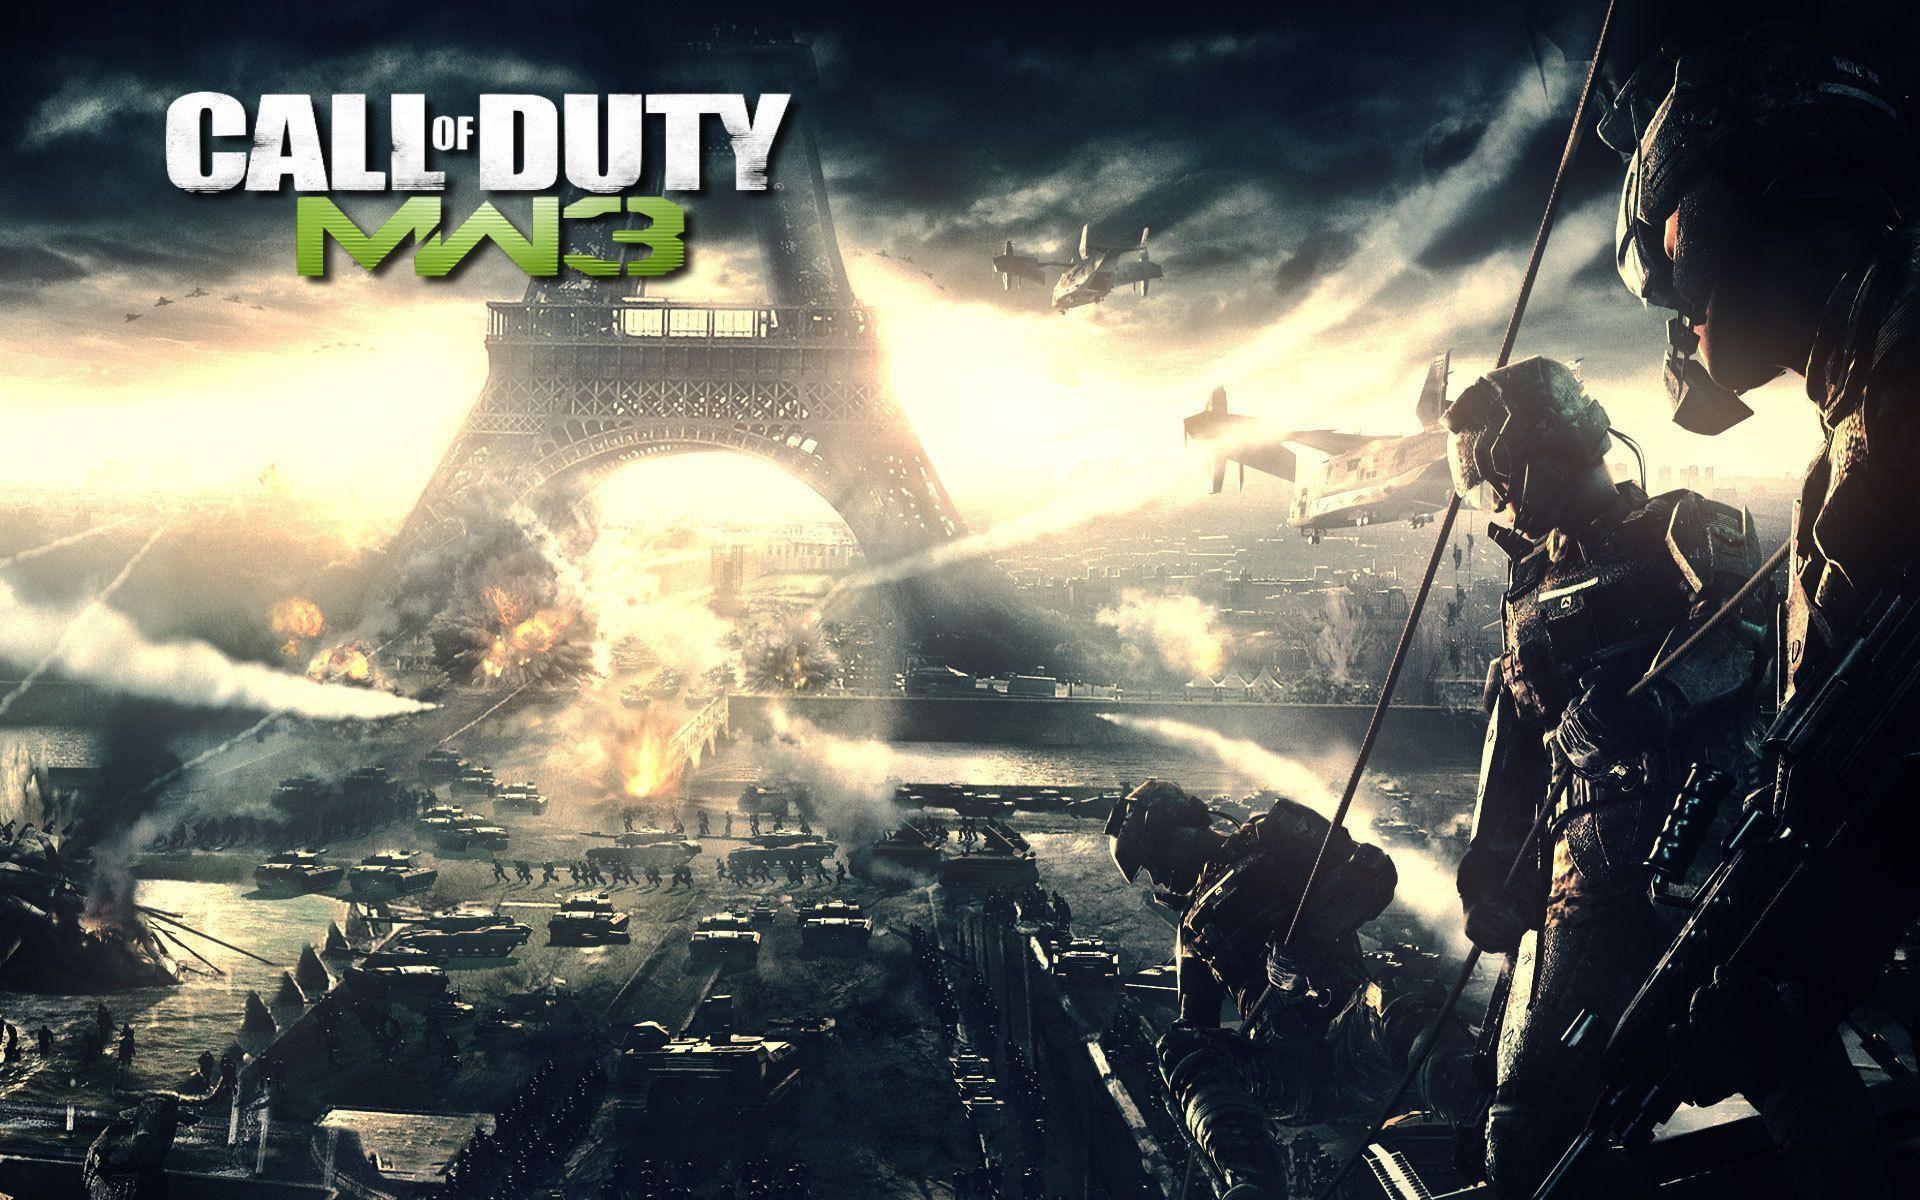 Call of Duty mw3. Publish with Glogster!